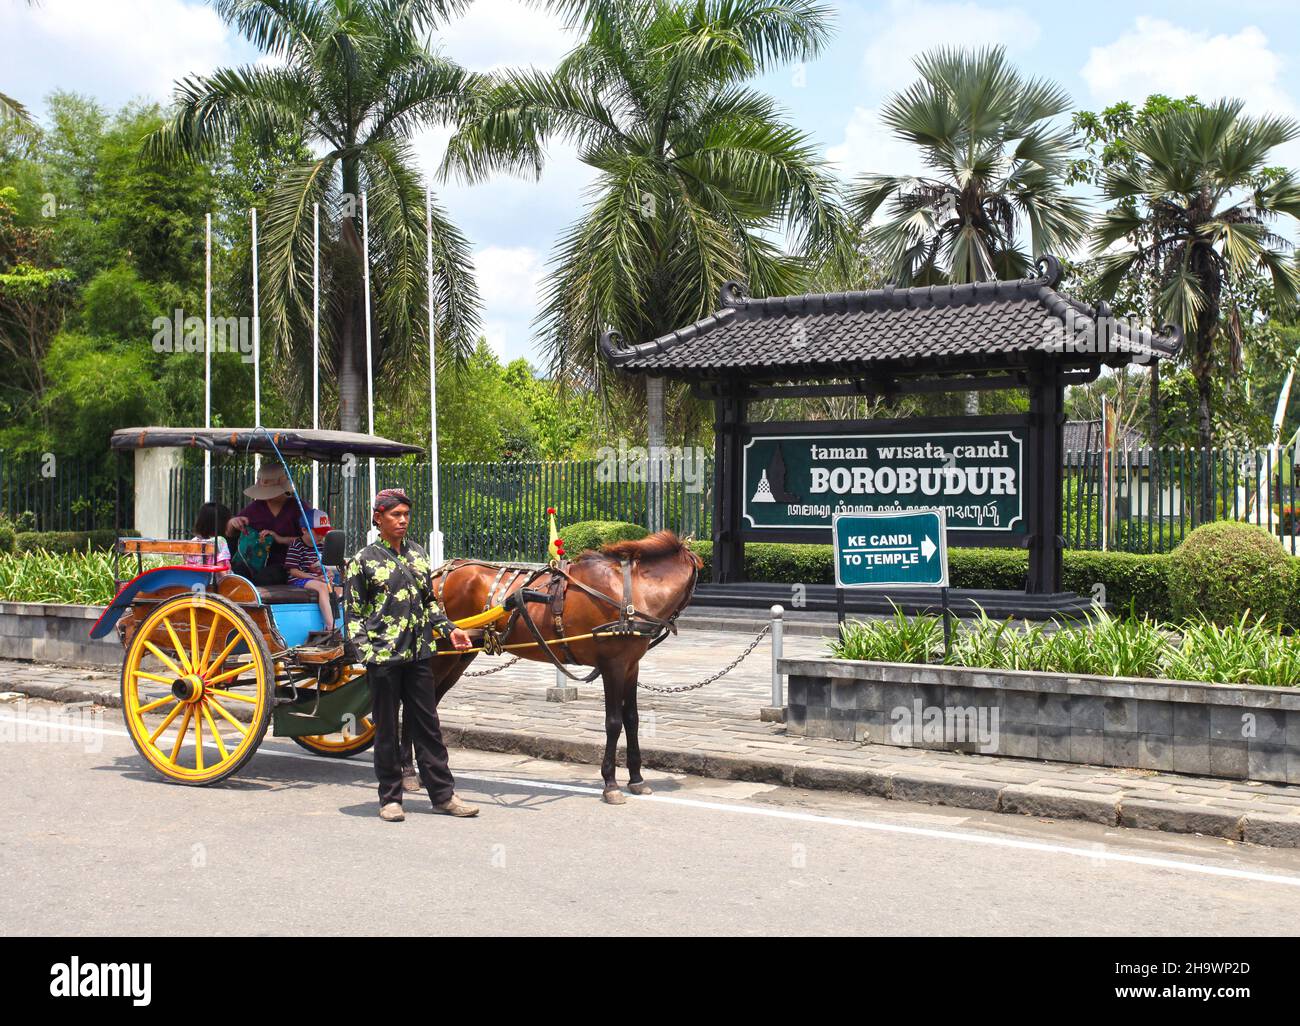 A traditional horse and cart or Delman outside the grounds of Borobudur temple in Magelang, Central Java, Indonesia. Stock Photo